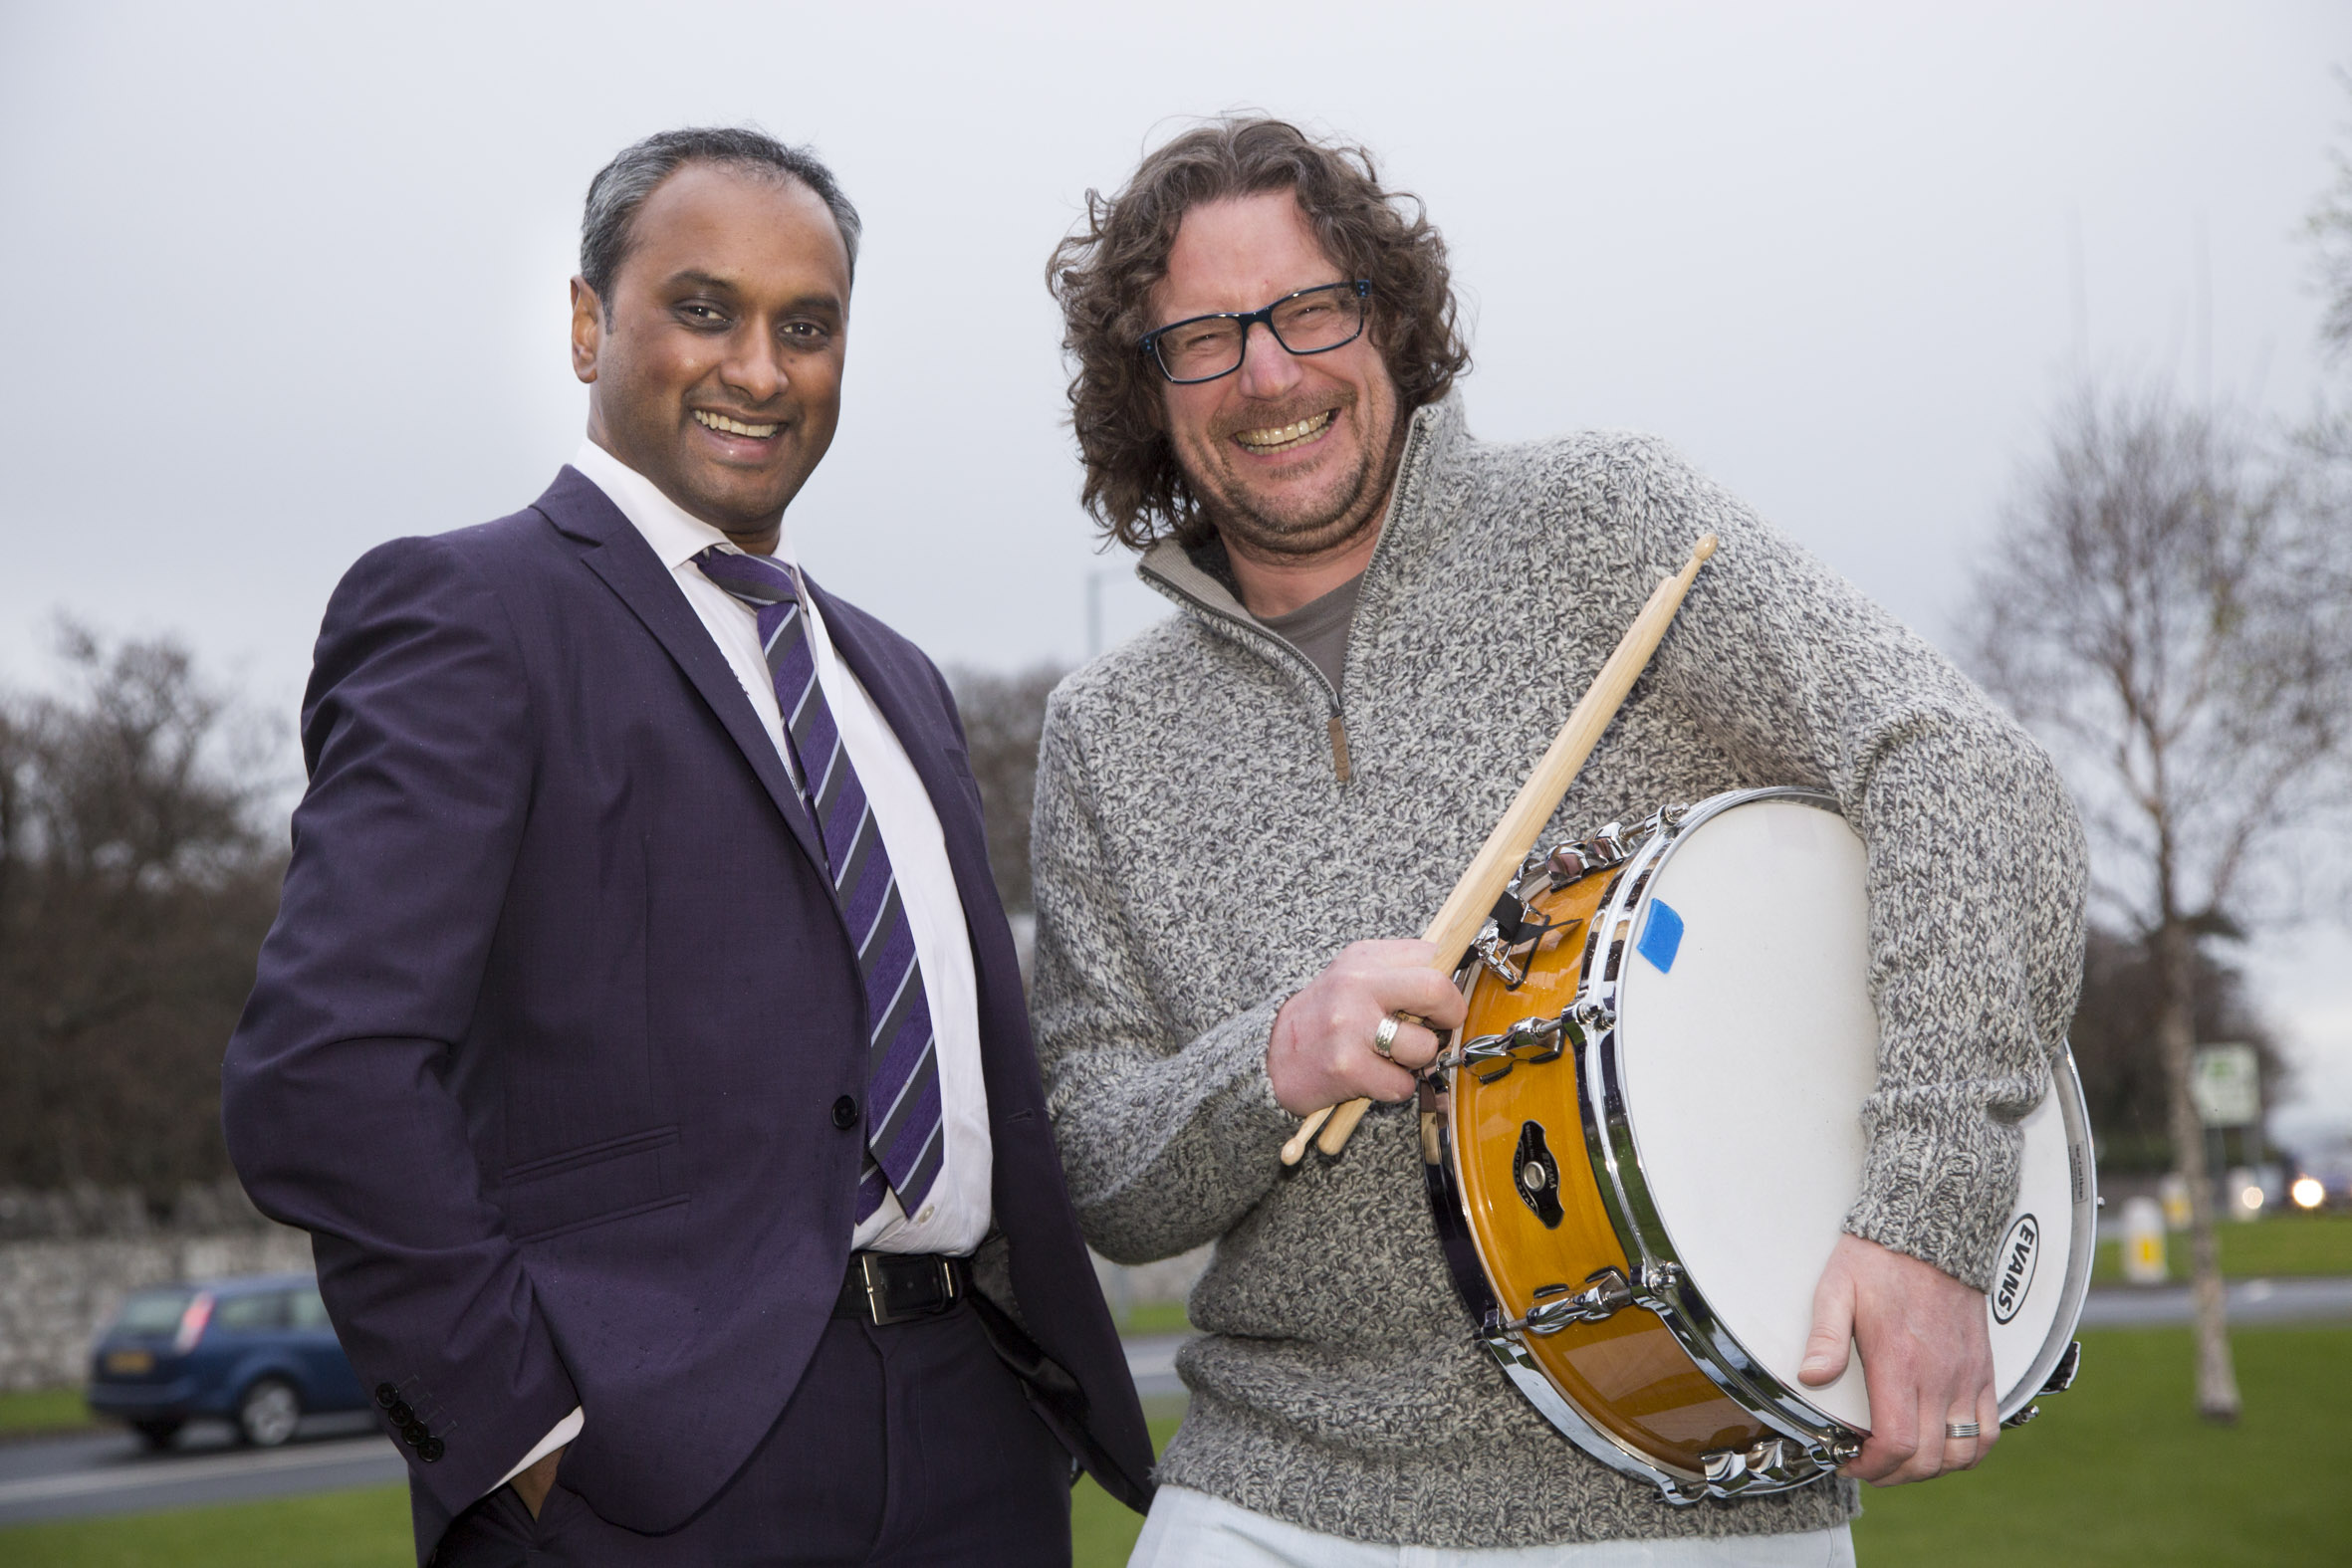 Specialist treatment helps top drummer give pain the elbow